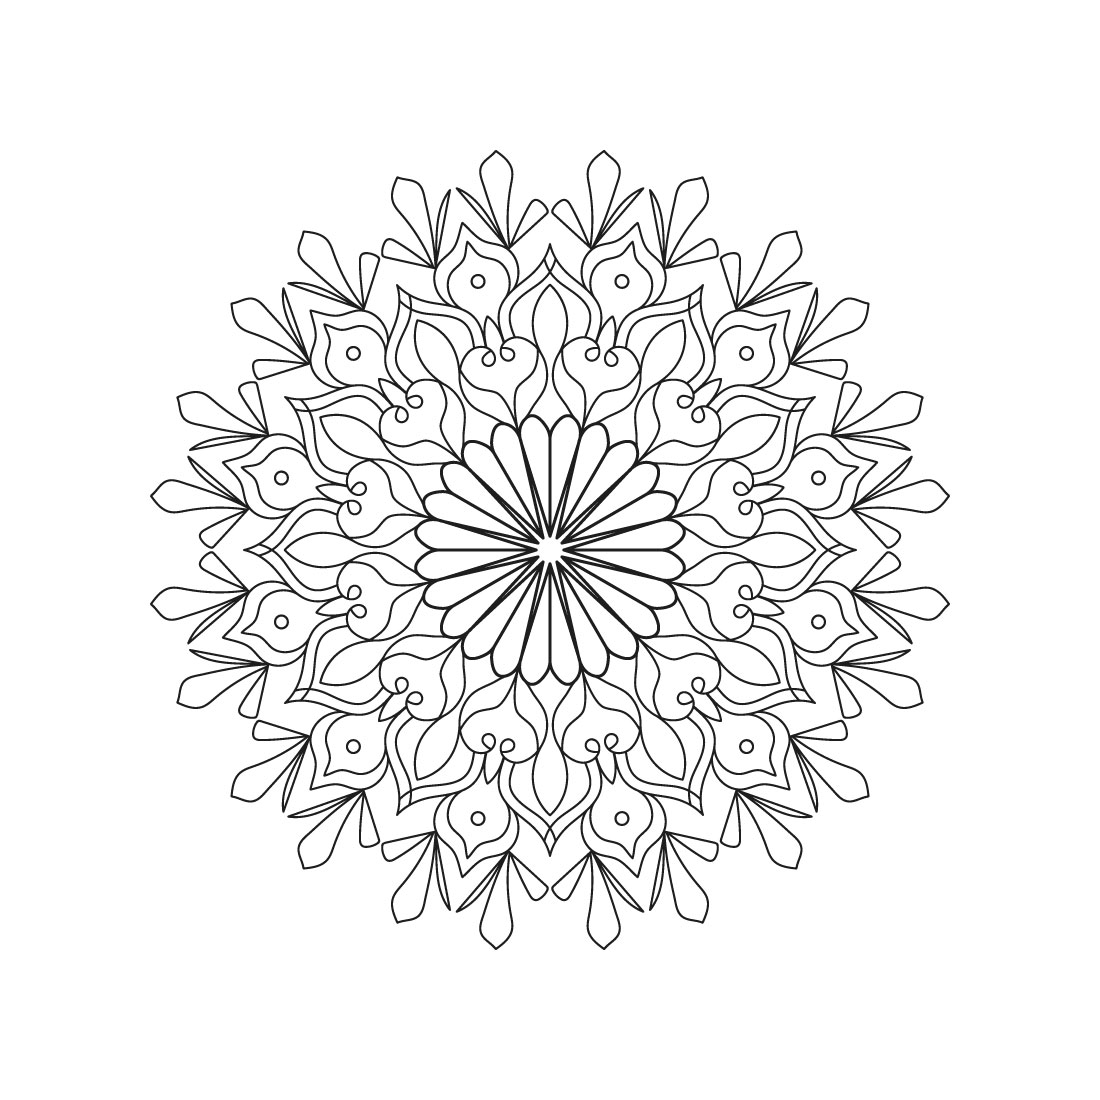 bundle of 10 blossoming beauty mandala coloring book pages 04 862